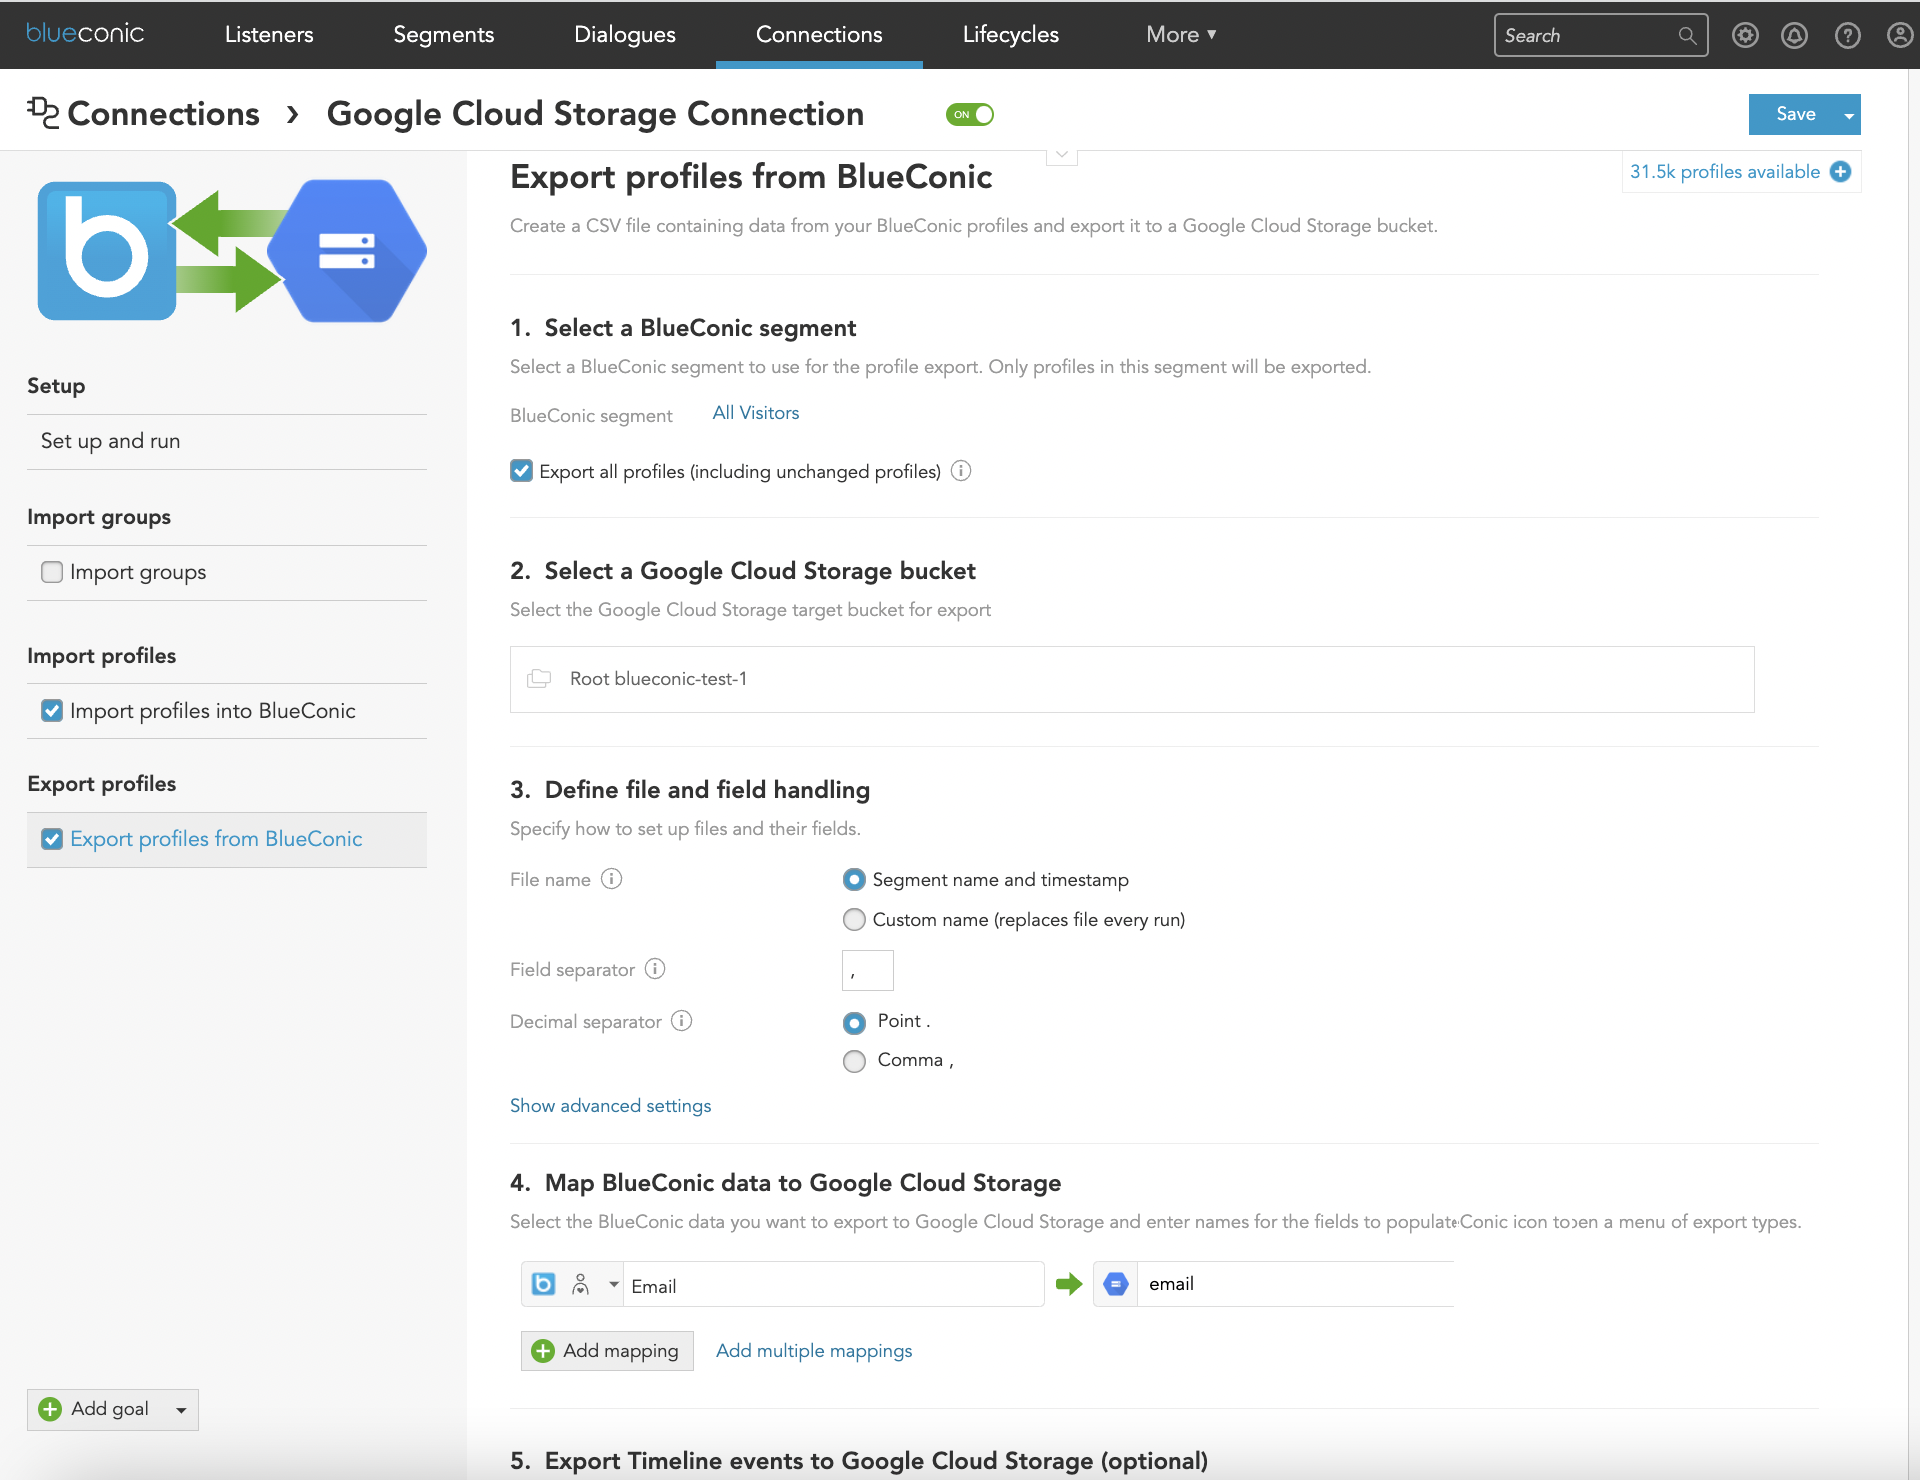 How to connection BlueConic customer profile data with Google Cloud Storage buckets using the Google Cloud Storage connection